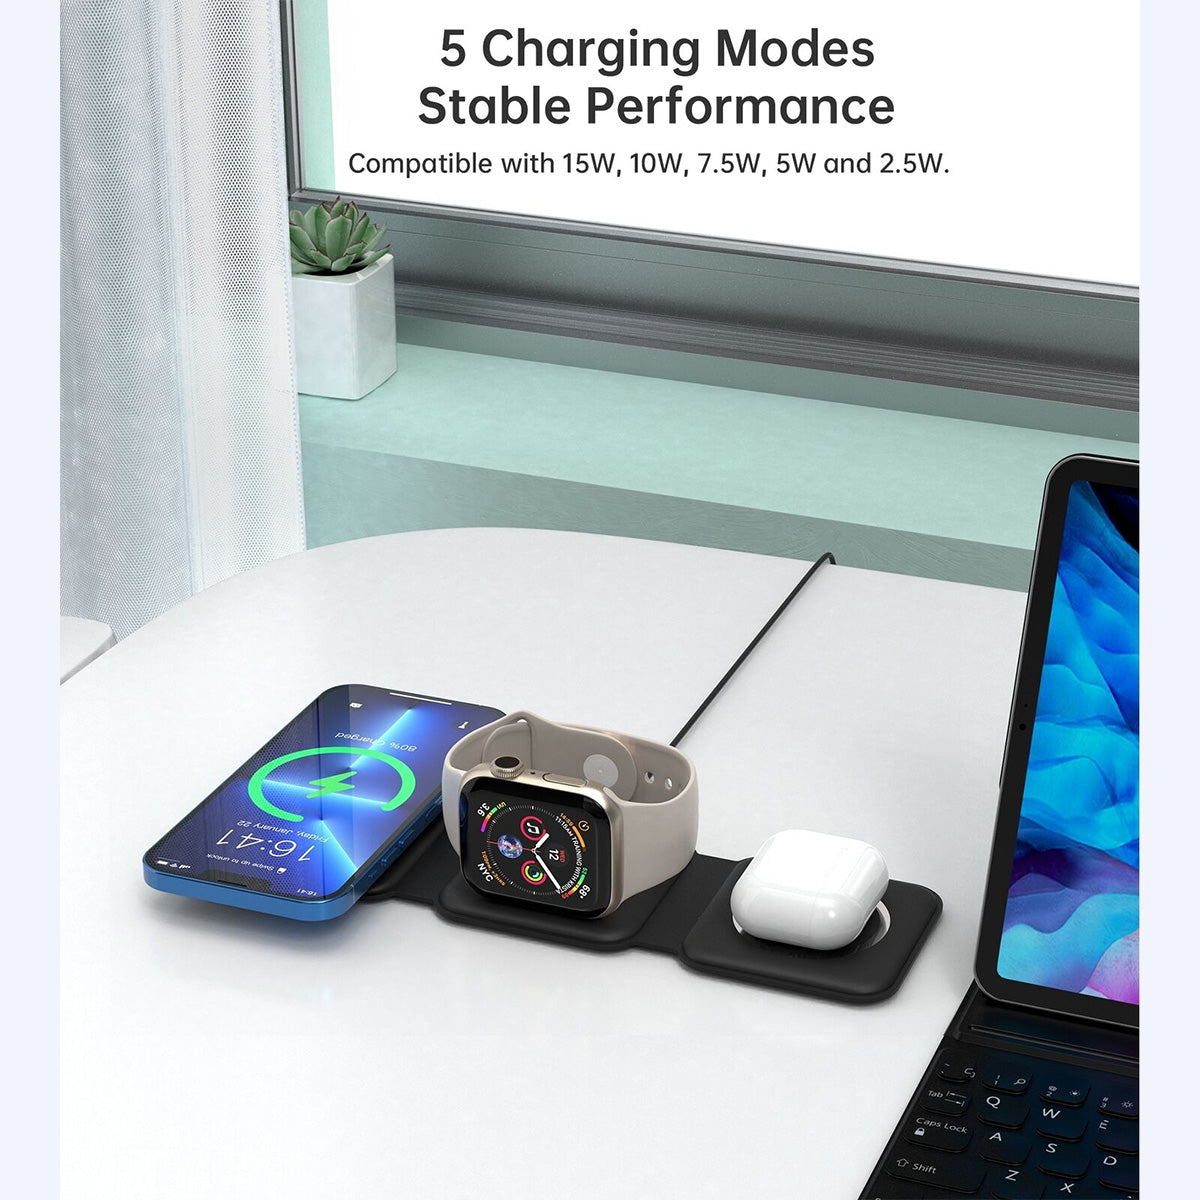 Choetech 3-in-1 Foldable Magnetic Wireless Charging Station T588-F (Black)